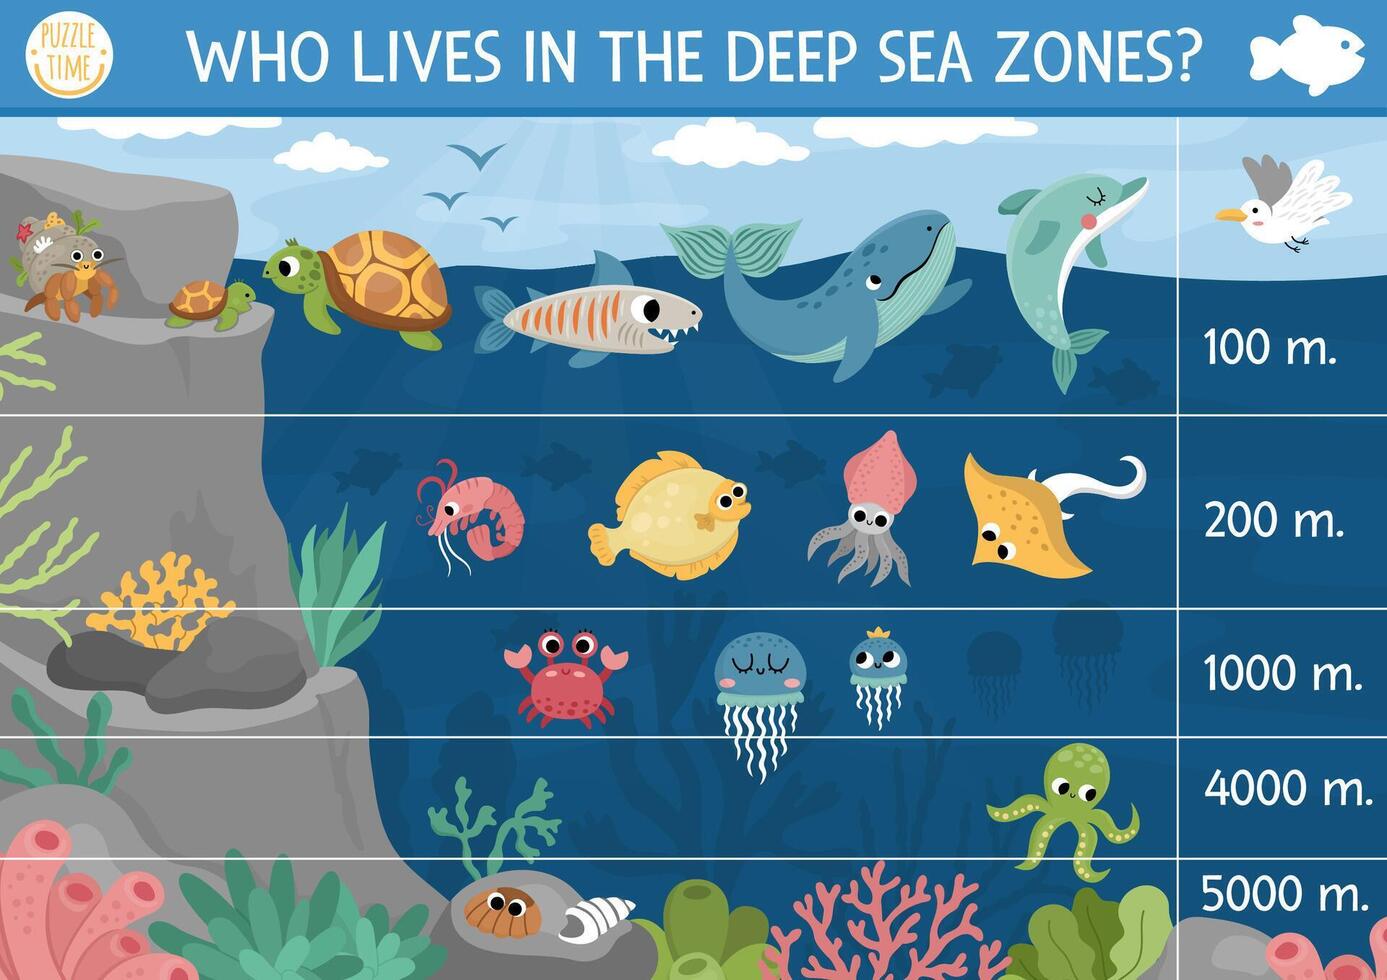 under the sea landscape illustration. Ocean life scene poster with animals, dolphin, whale, jellyfish, crab, tortoise. Educational water nature background. Who lives in the deep sea zone vector